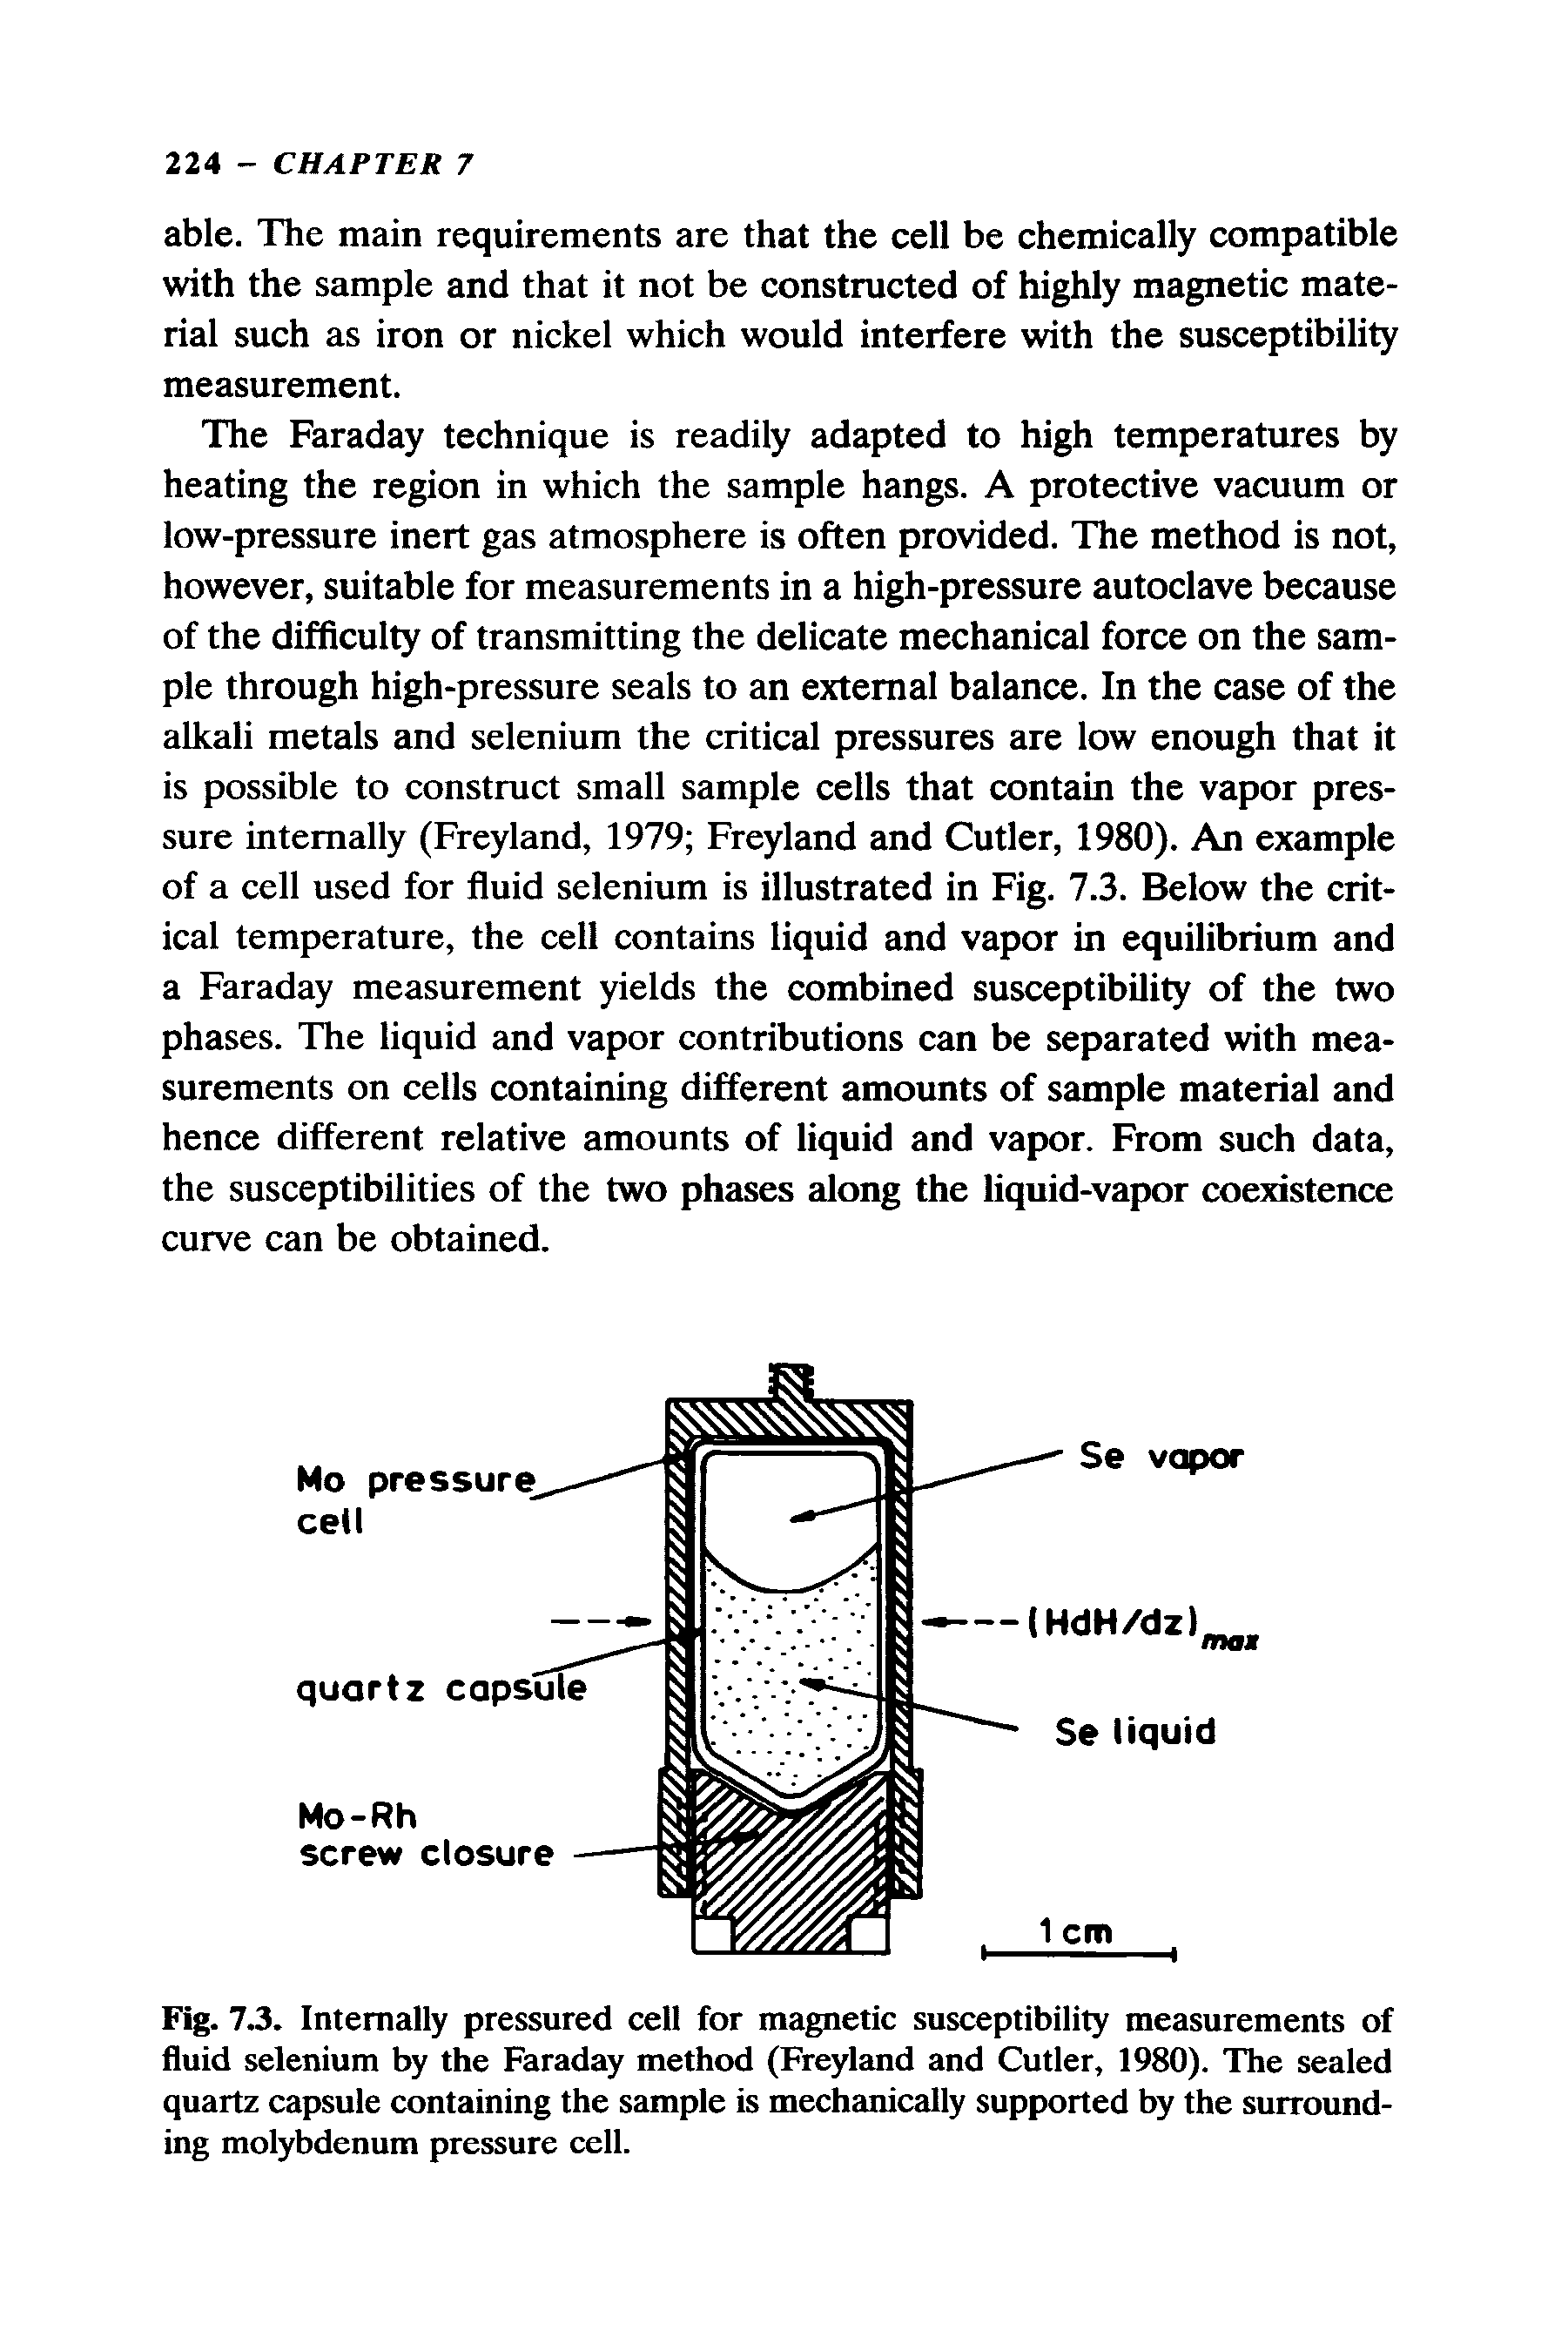 Fig. 7.3. Internally pressured cell for magnetic susceptibility measurements of fluid selenium by the Faraday method (Freyland and Cutler, 1980). The sealed quartz capsule containing the sample is mechanically supported by the surrounding molybdenum pressure cell.